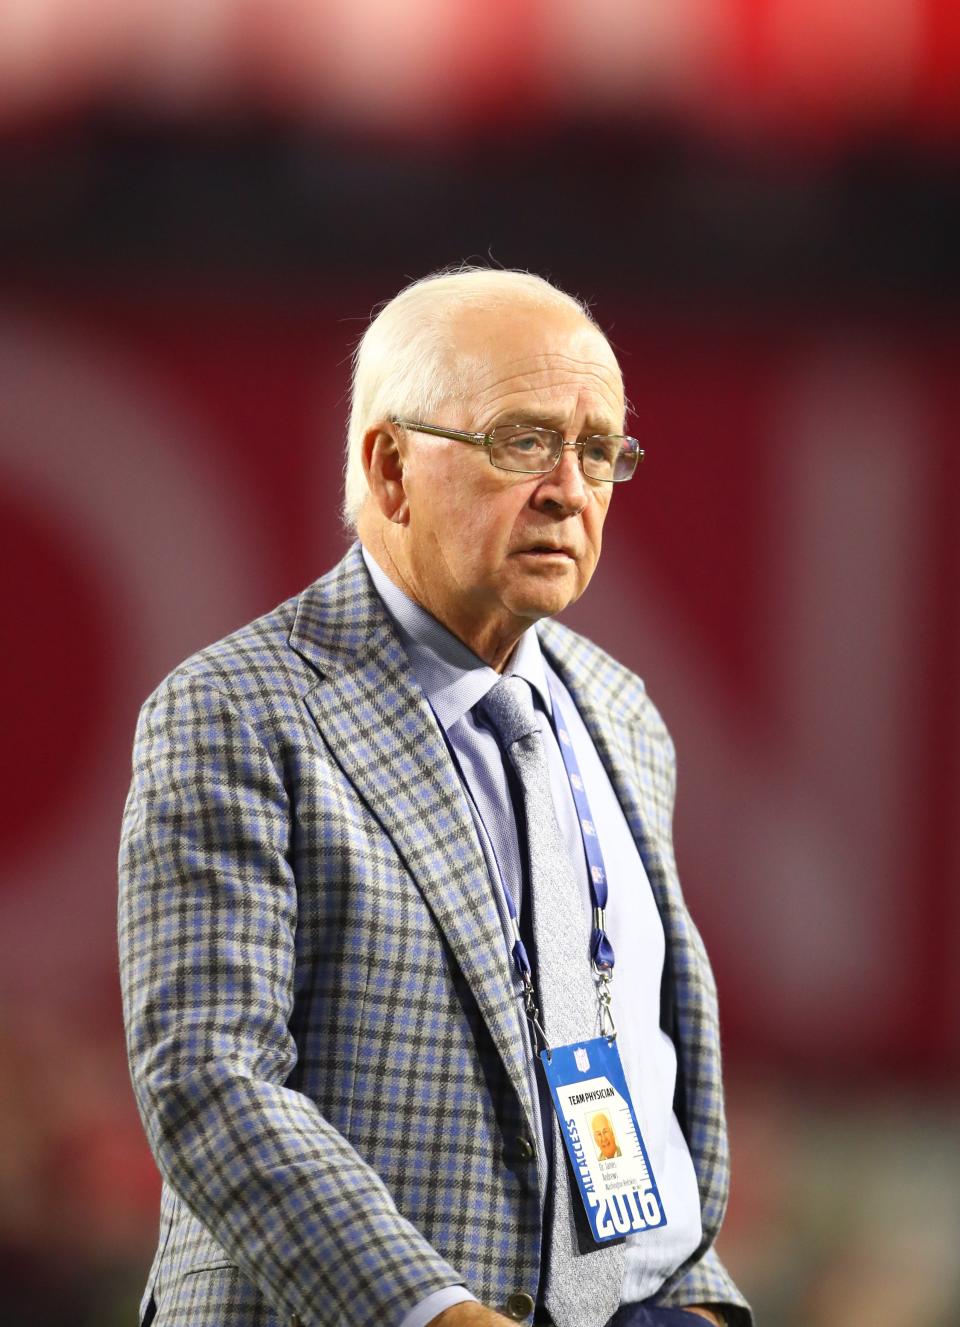 Dr. James Andrews, shown at a Washington-Arizona NFL game in Phoenix in 2016, has performed Tommy John surgery on numerous athletes.